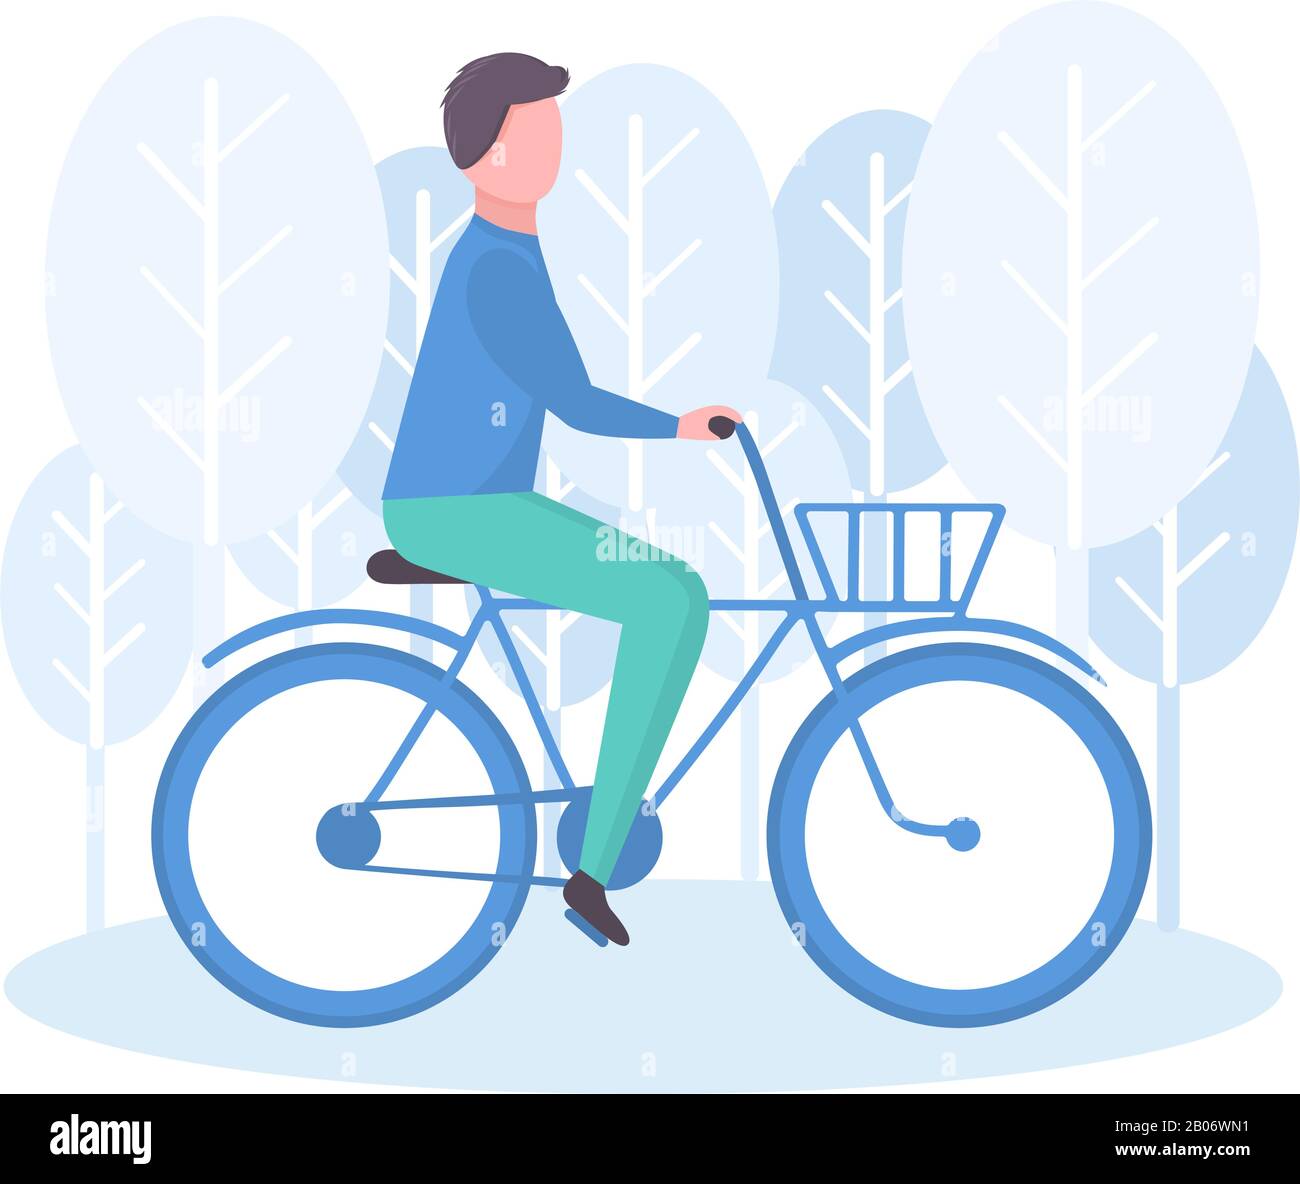 Flat Illustration with a man riding a bicycle Stock Vector